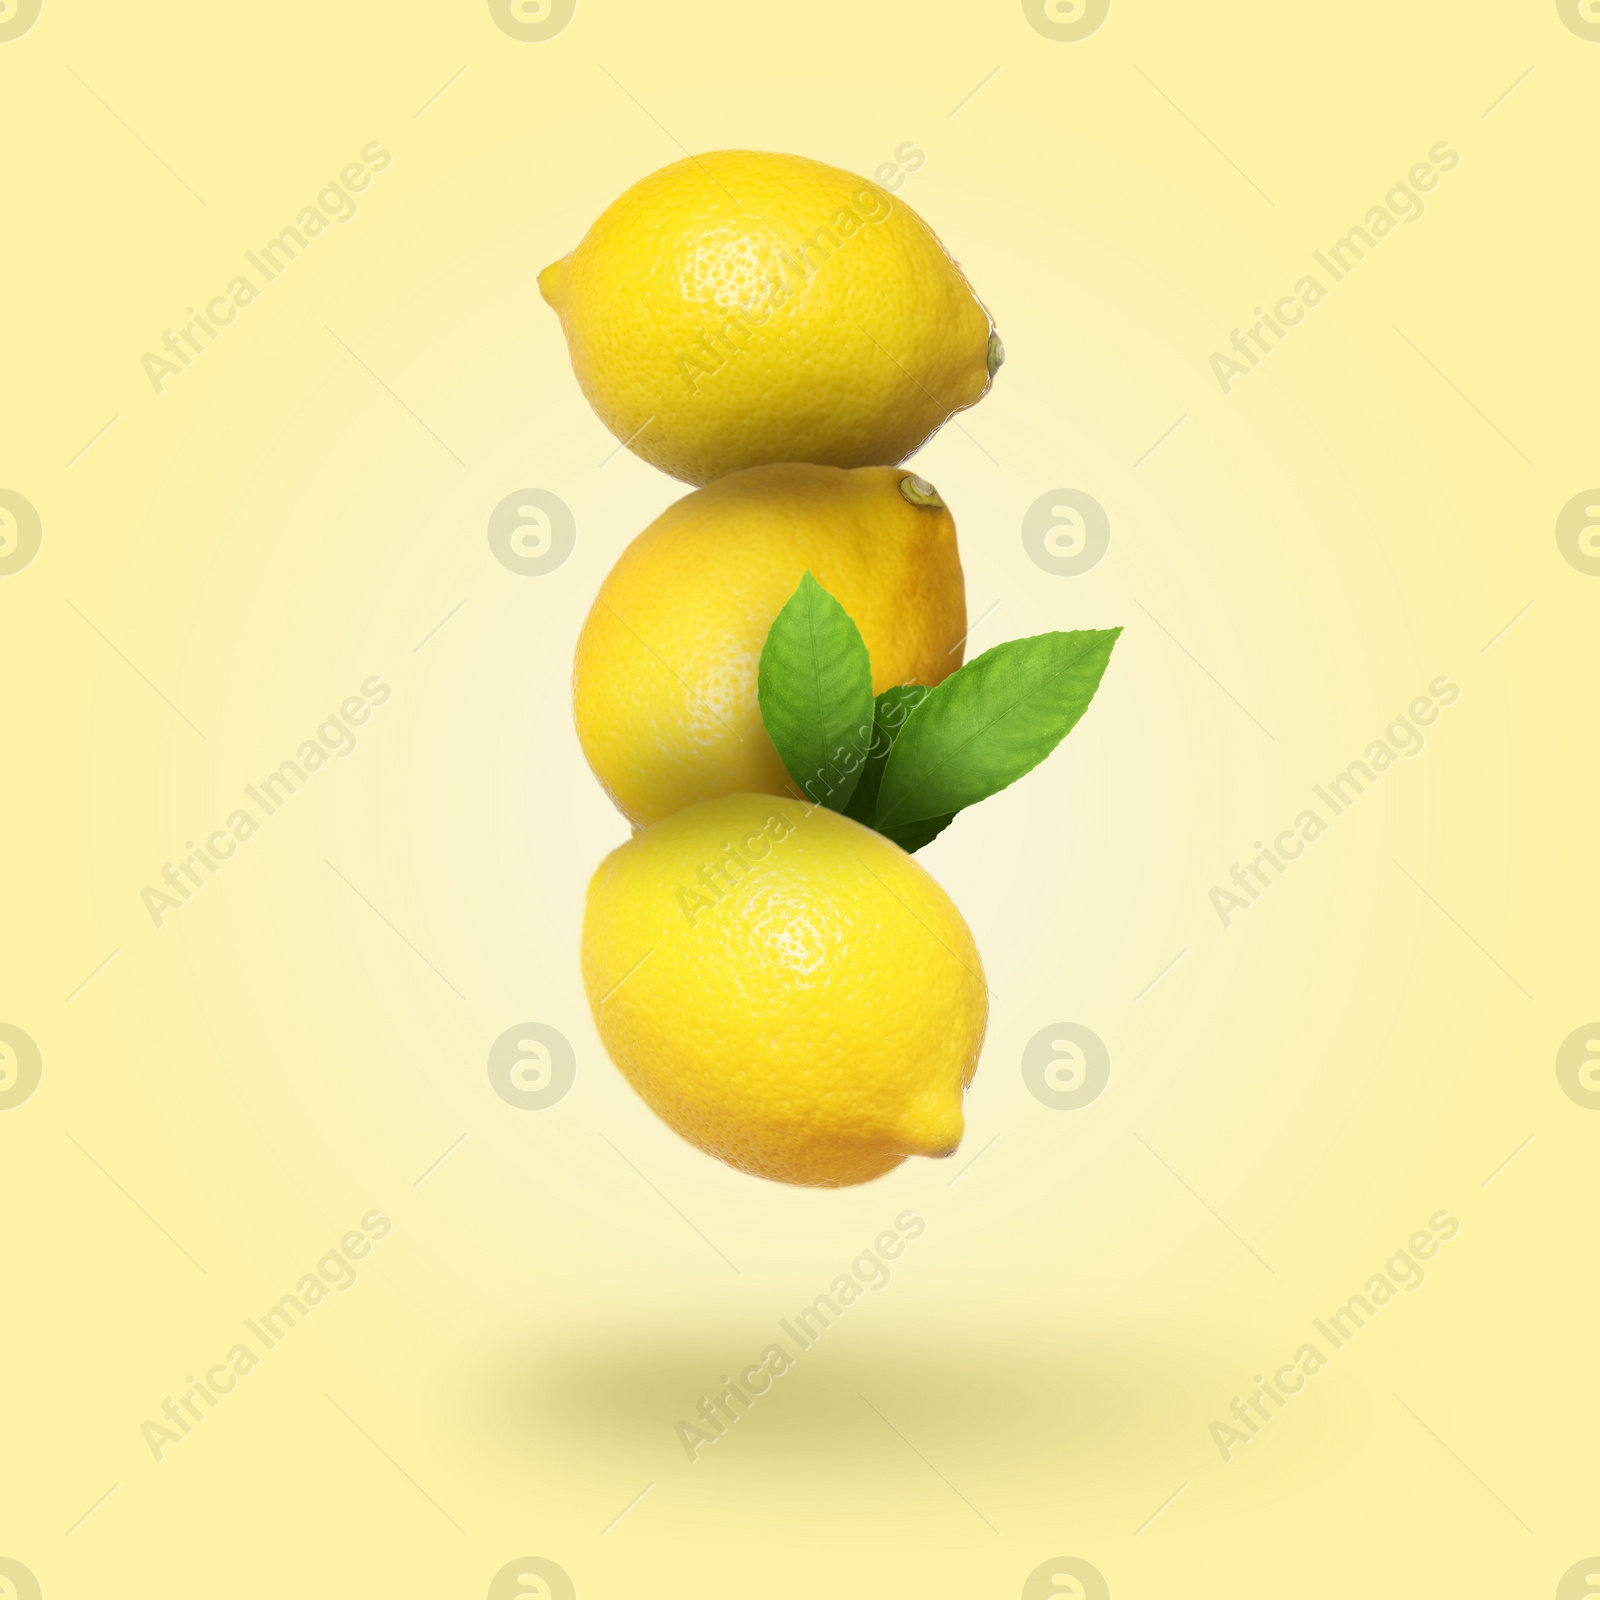 Image of Whole fresh lemons with green leaves falling on pale goldenrod background